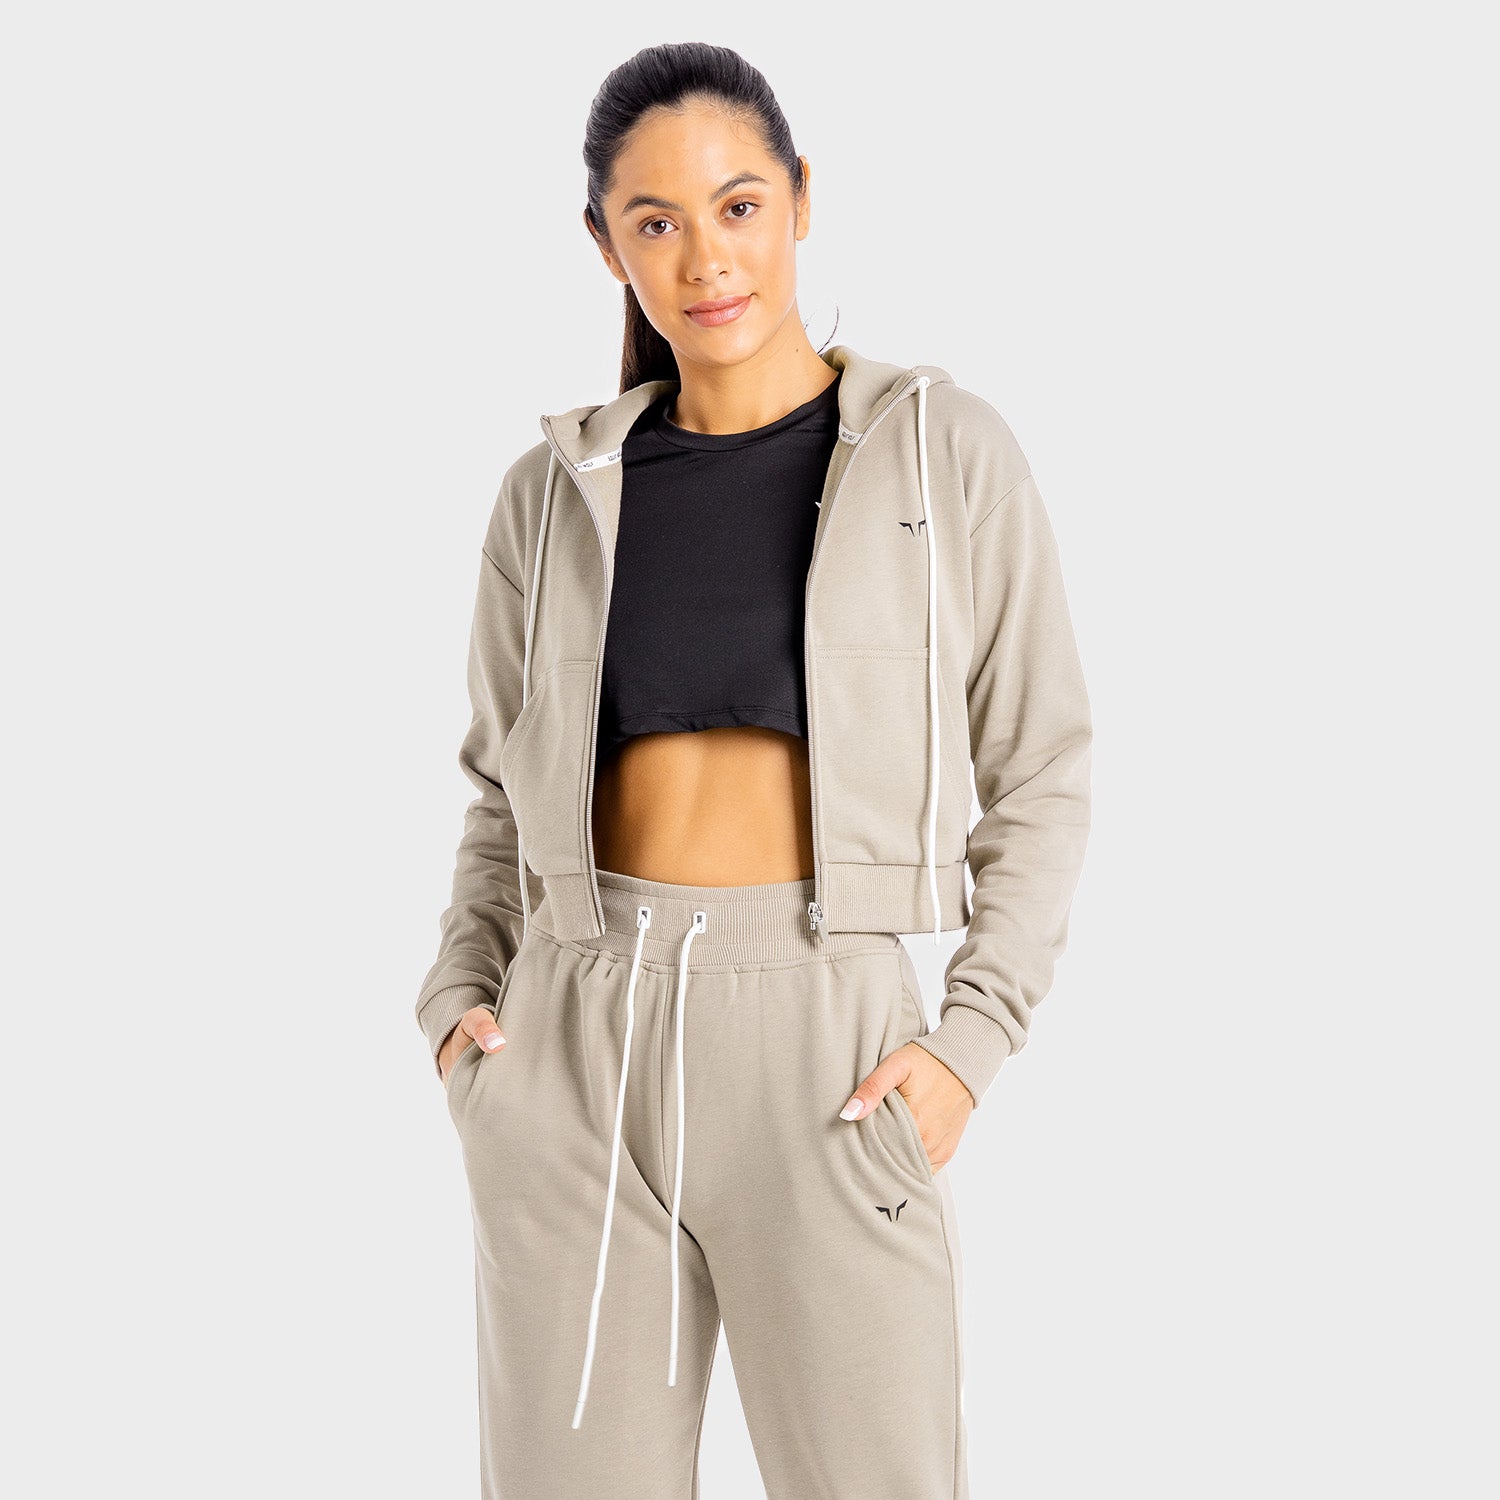 squatwolf-gym-hoodies-women-core-zip-up-taupe-workout-clothes